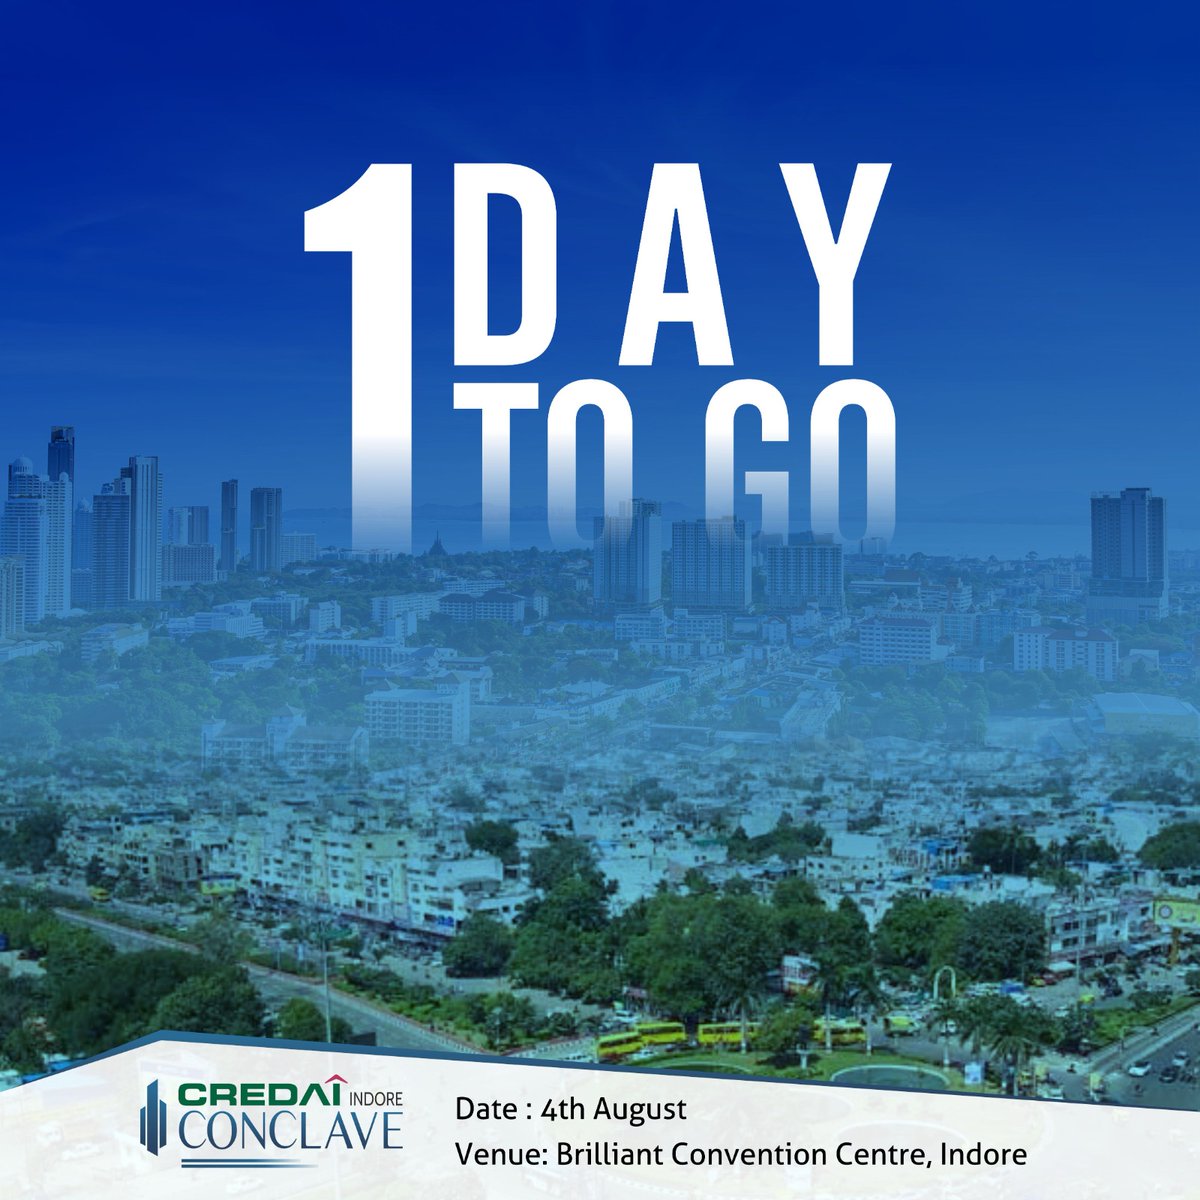 #Vision4Realty Counting Down to Brilliance! 1 DAY TO GO for the CREDAI INDORE Conclave - 'Where Innovation Meets Excellence!'

(ENTRY BY INVITE ONLY)
#credai #credaiindore #Infra4India #realestate #RealEstateConference #CREDAIIndia #CREDAIIndoreConclave2023 #CountdownBegins